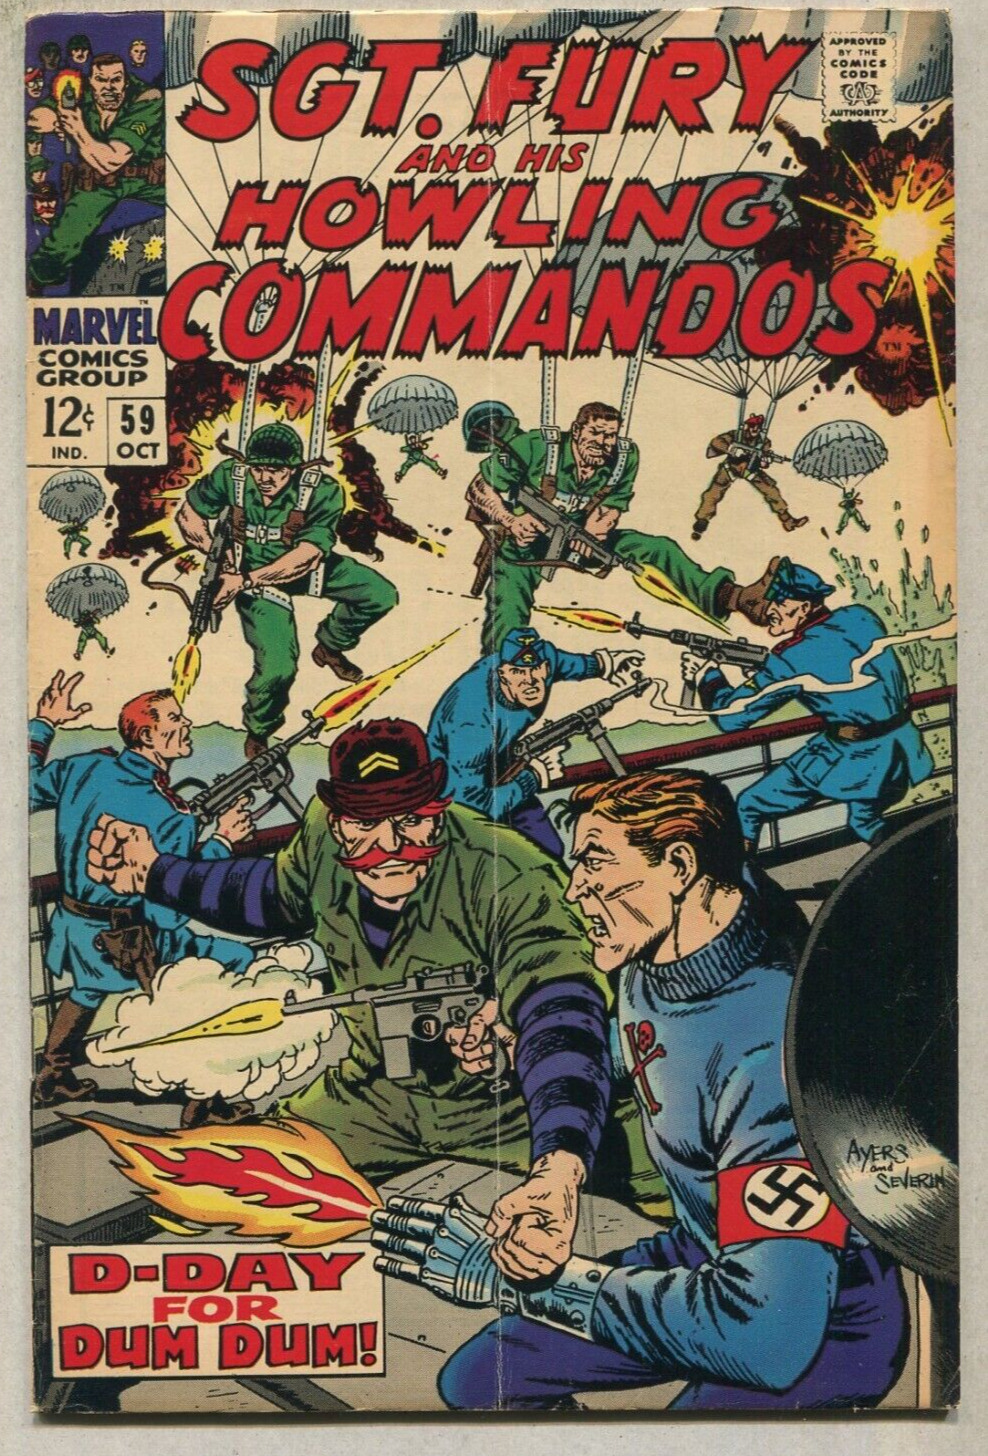 SGT. Fury And His Howling Commandos #59 VG/FN D-Day For Dum Dum  Marvel SA